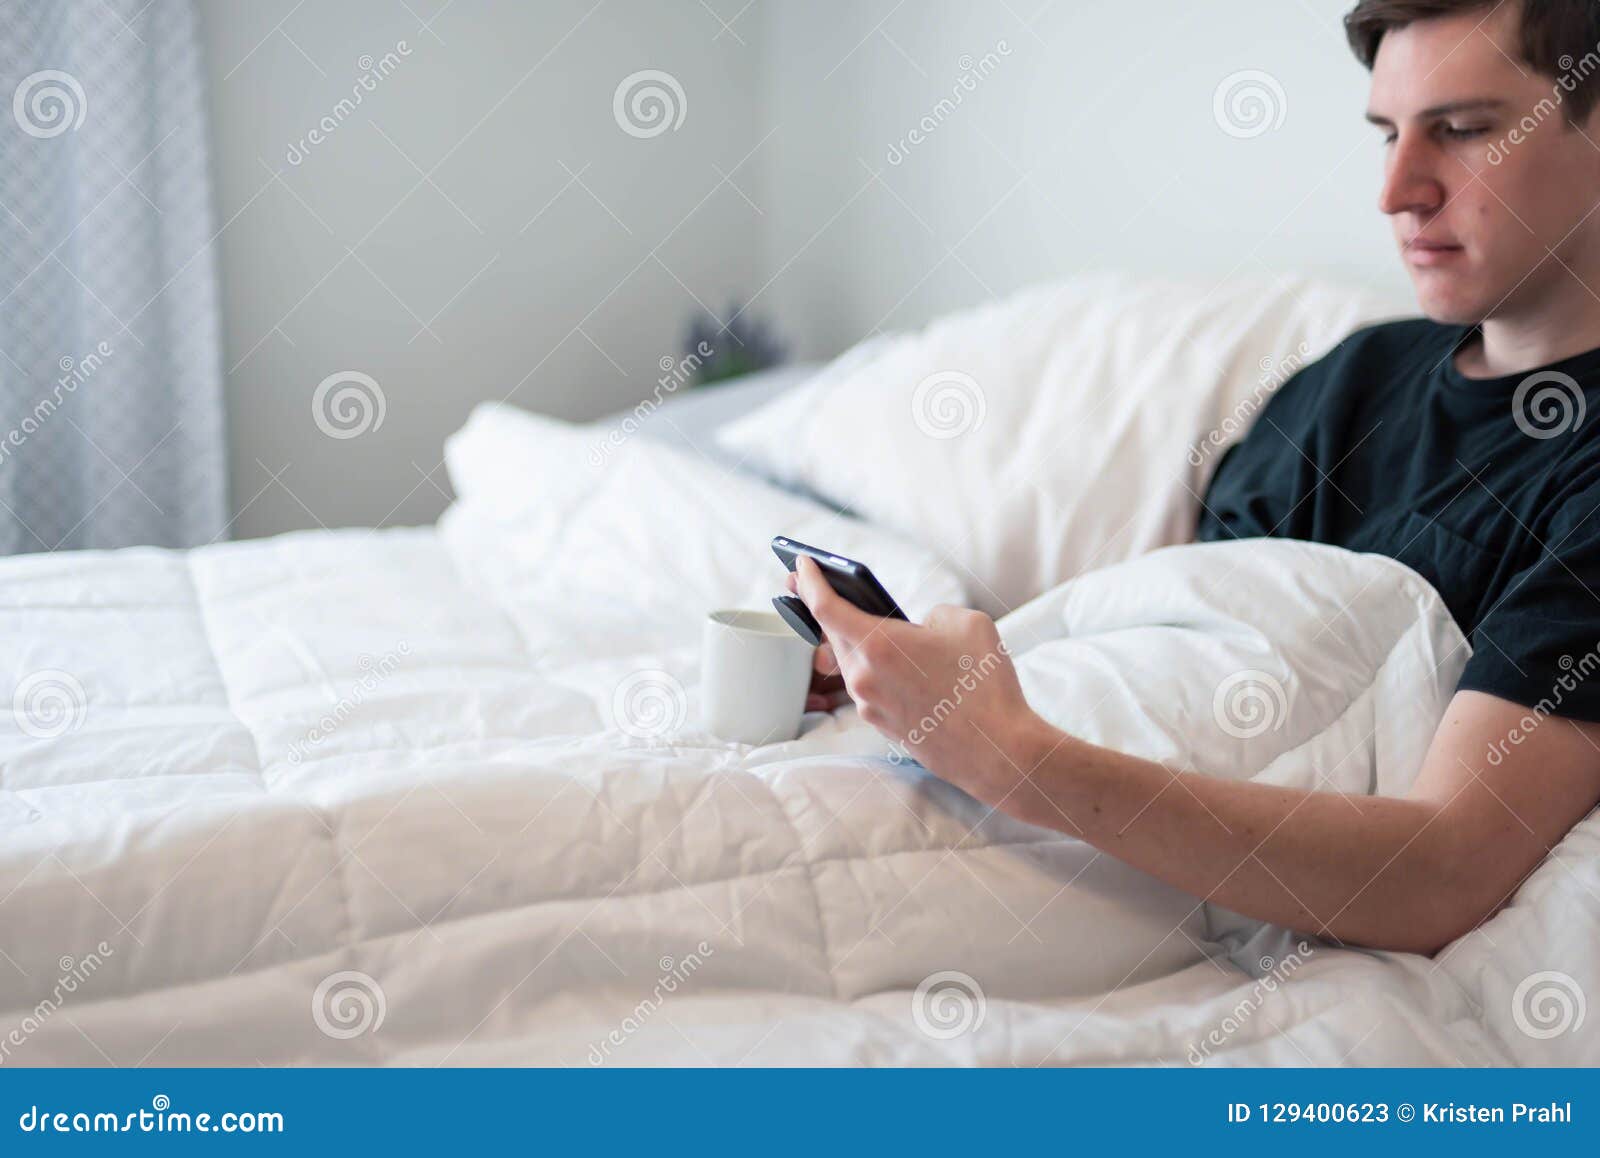 College Student Waking Up And Having Coffee In Bed Stock 